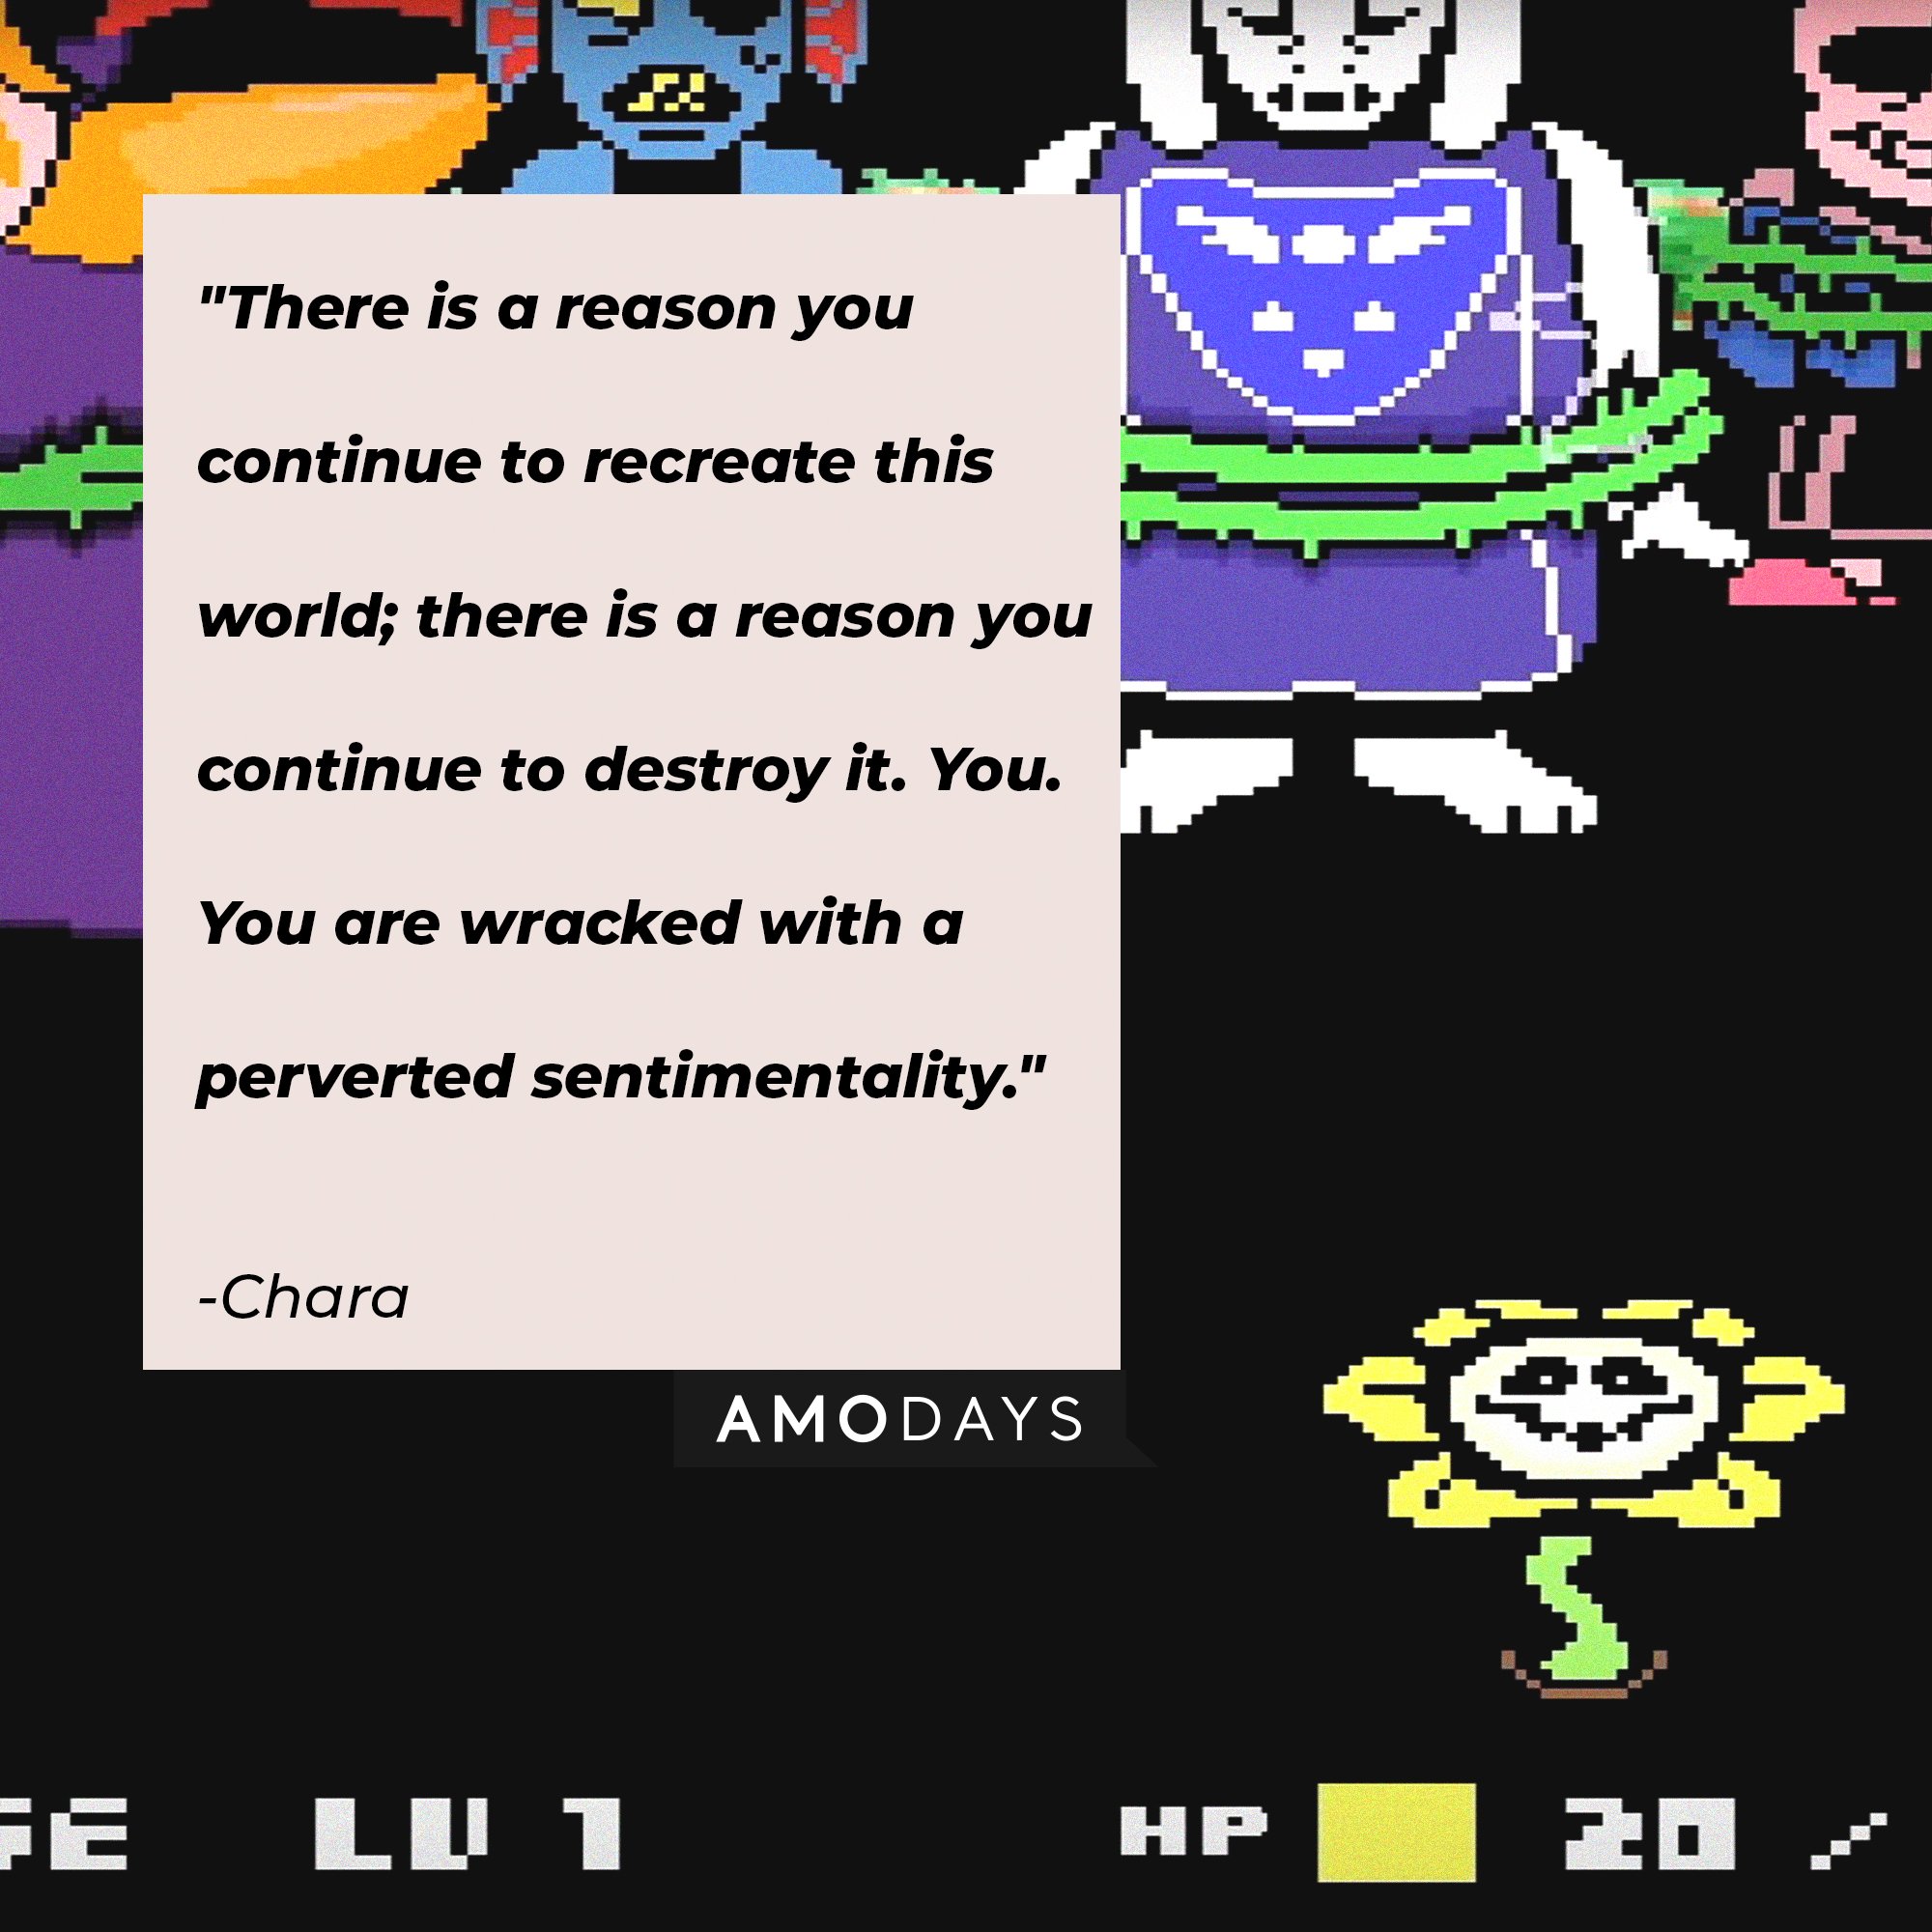 Chara’s quote: "There is a reason you continue to recreate this world; there is a reason you continue to destroy it. You. You are wracked with a perverted sentimentality." | Image: AmoDays